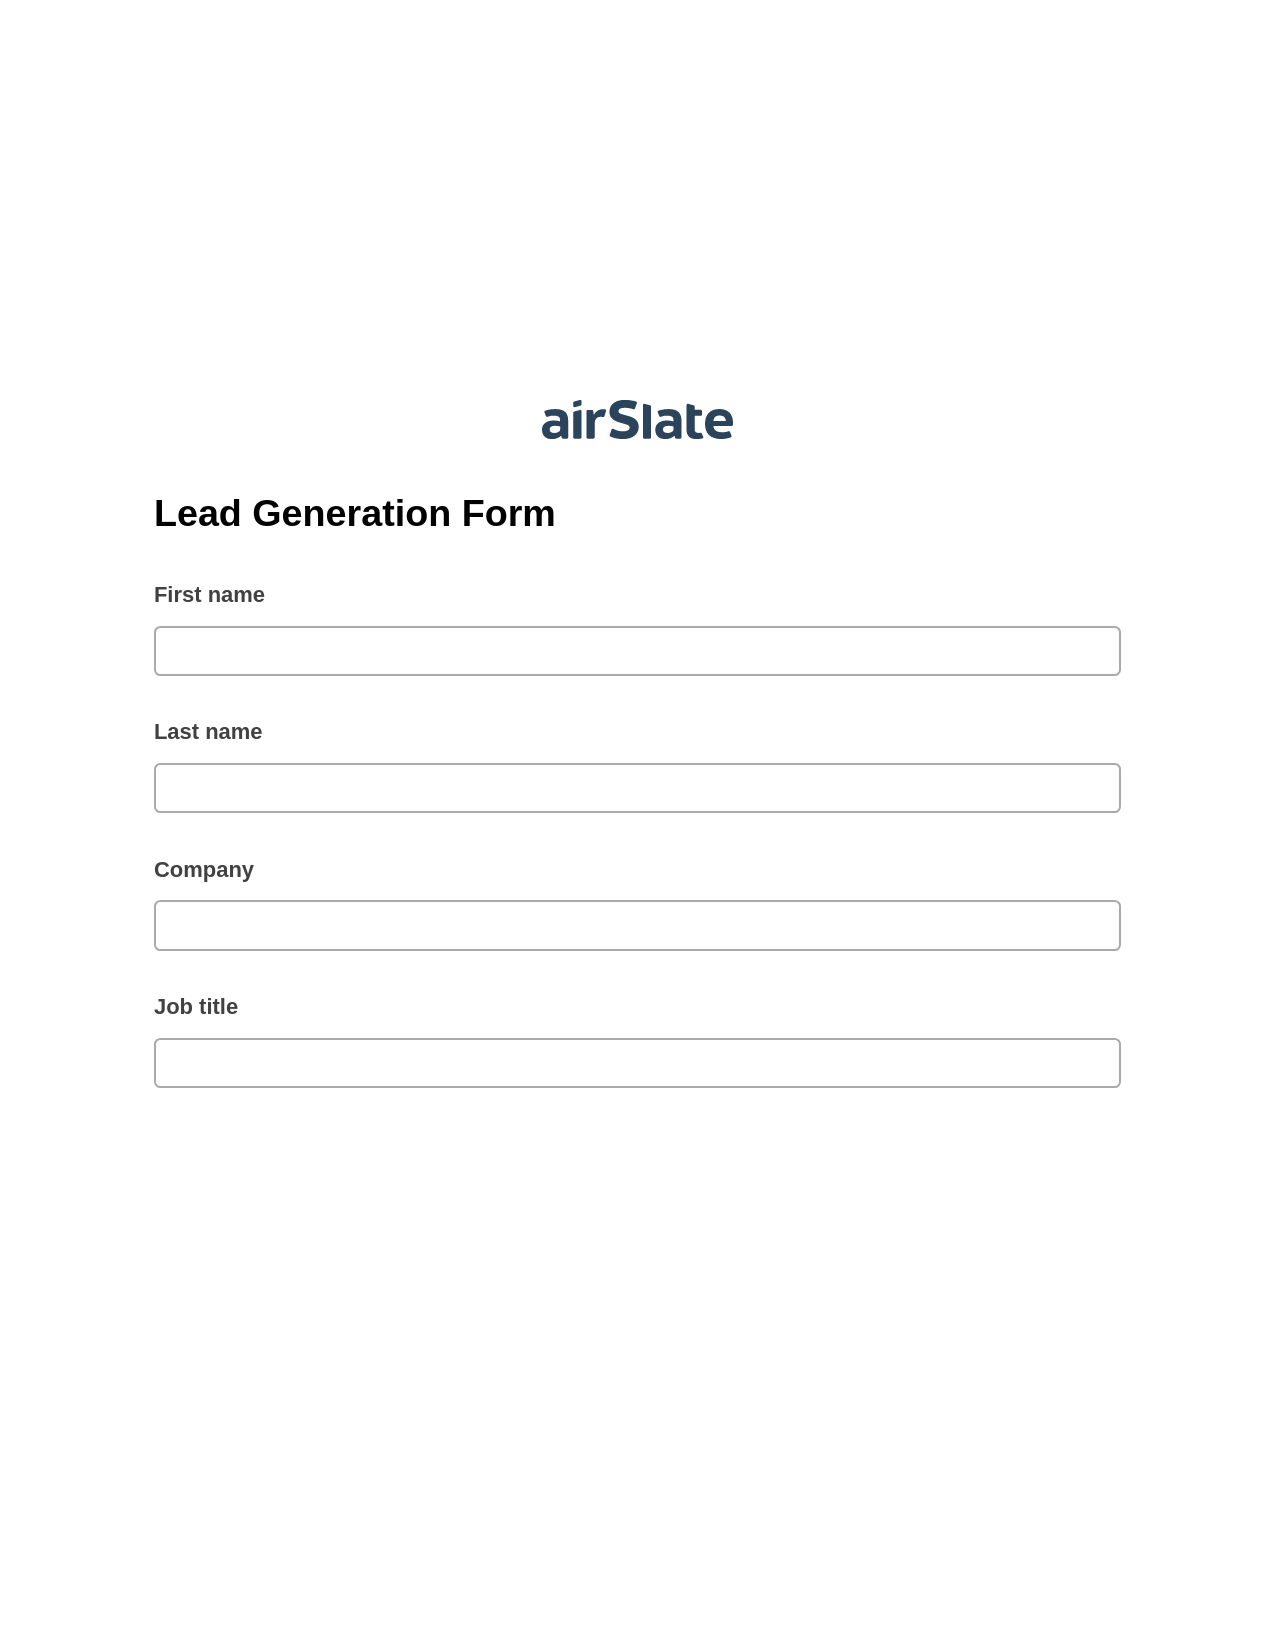 Lead Generation Form Pre-fill from Salesforce Records with SOQL Bot, System Bot - Create a Slate in another Flow, Post-finish Document Bot